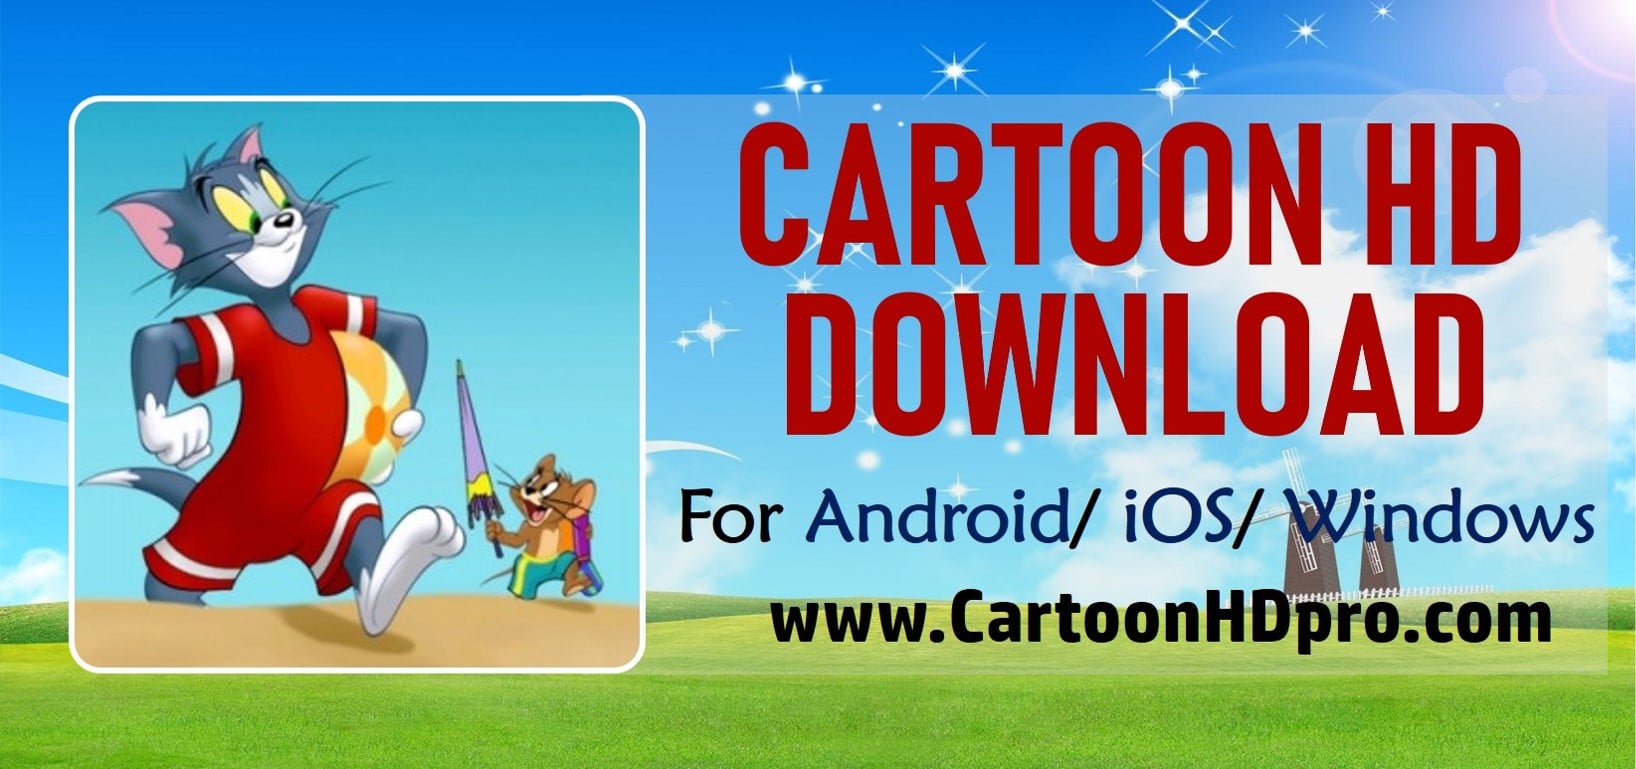 Cartoon Hd Download Free Cartoons Movies Tv Shows Official Website 2020